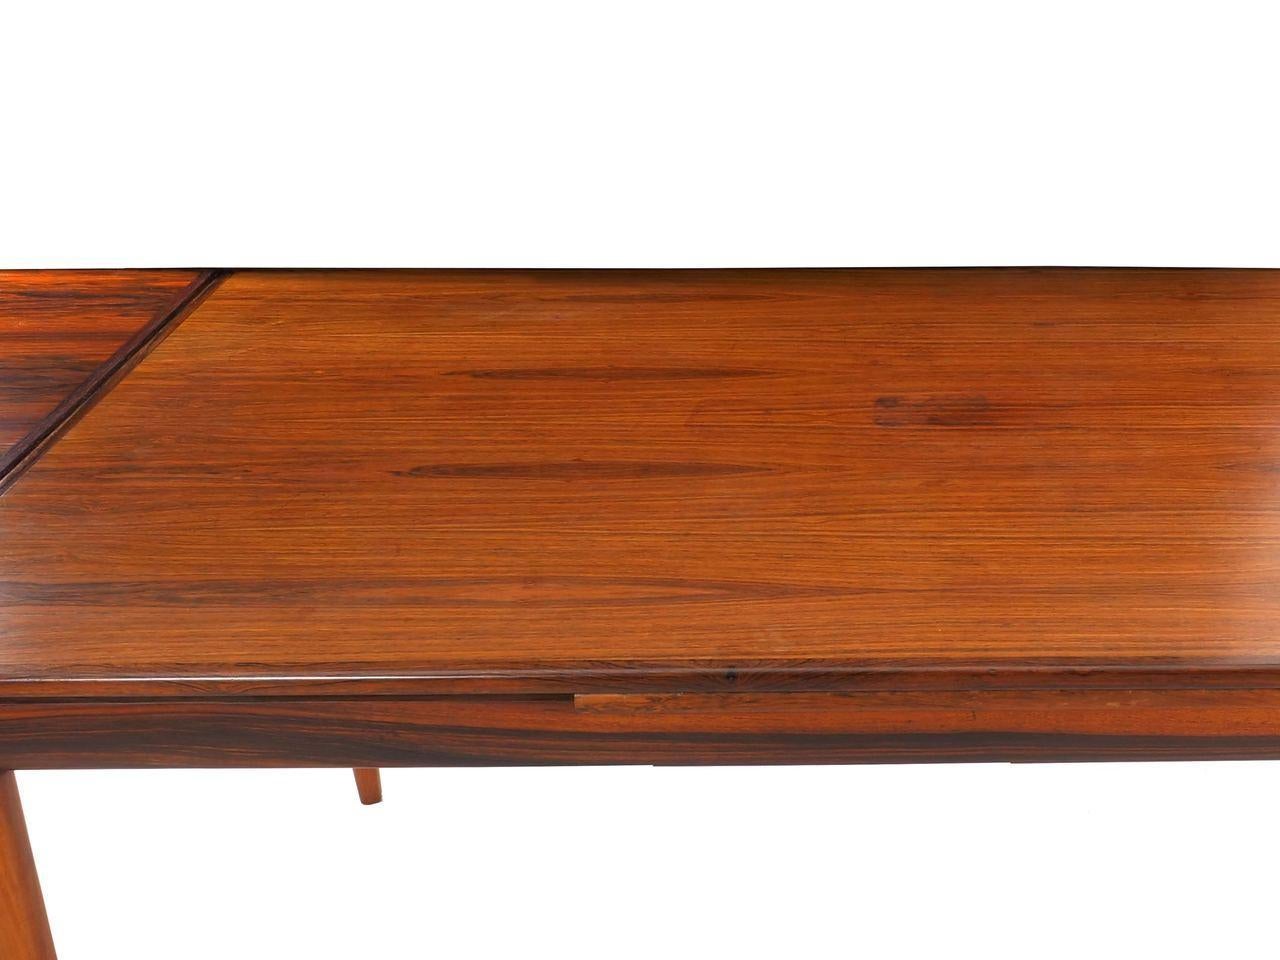 Danish Mid-Century Modern Rosewood Dining Table by Niels Møller, Model No. 254 8